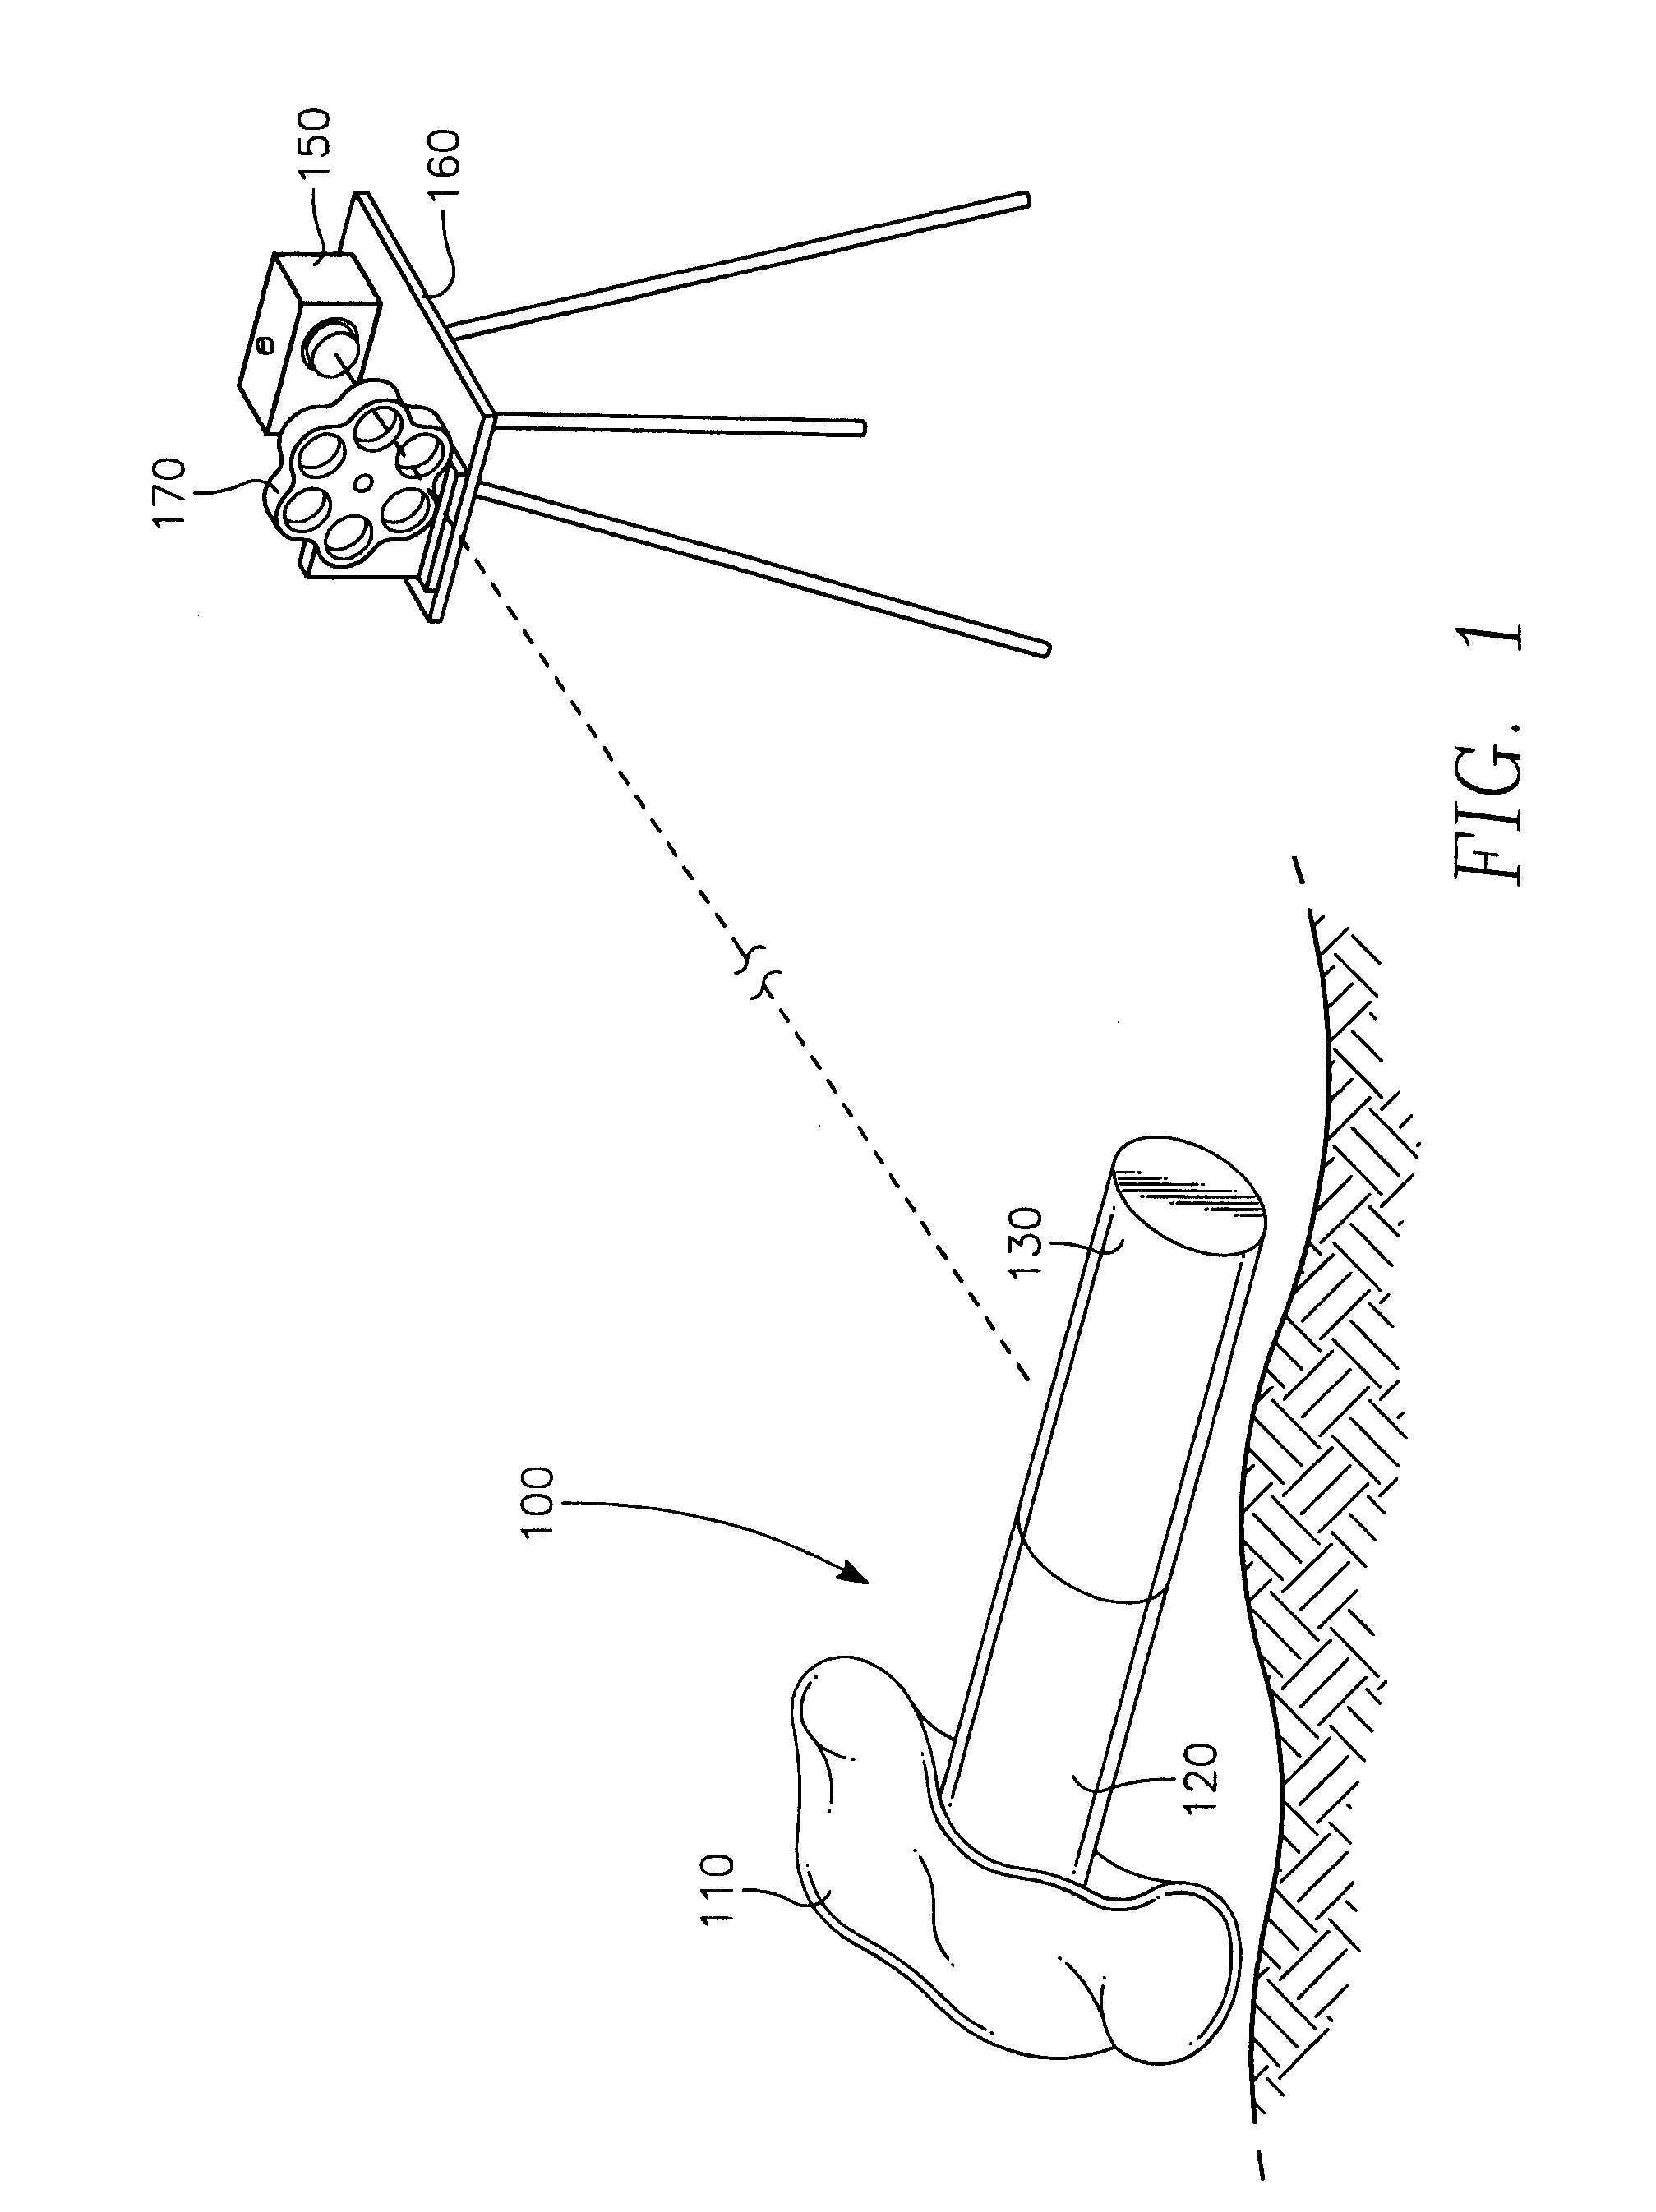 Apparatus for detection of objects